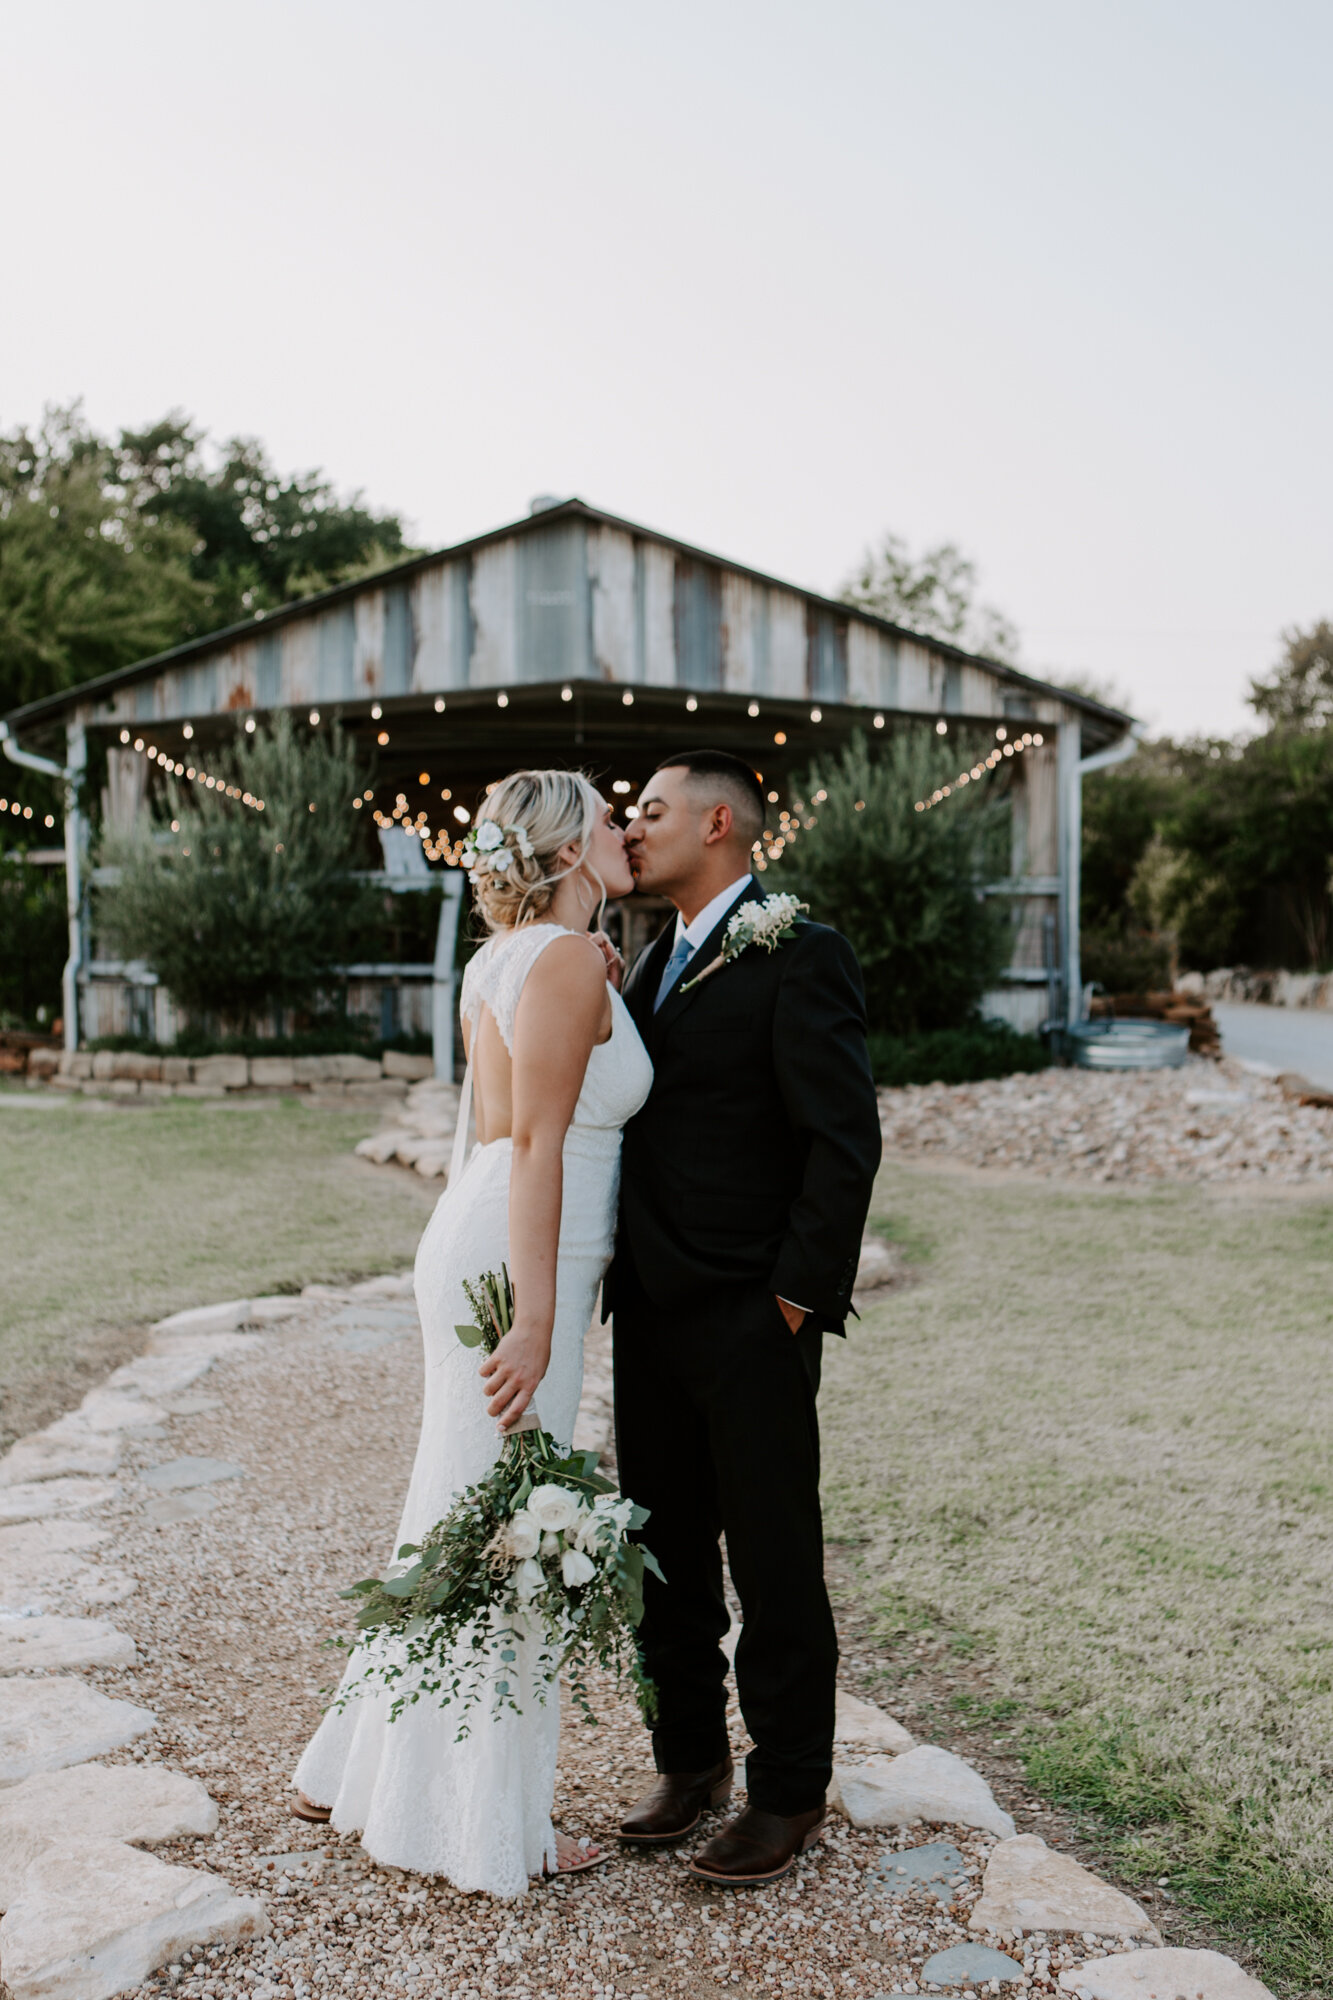 Bride and groom kiss in front of the venue in sunset. Radiant Bohemian Hill Country Wedding at Gruene Estate in New Braunfels, TX